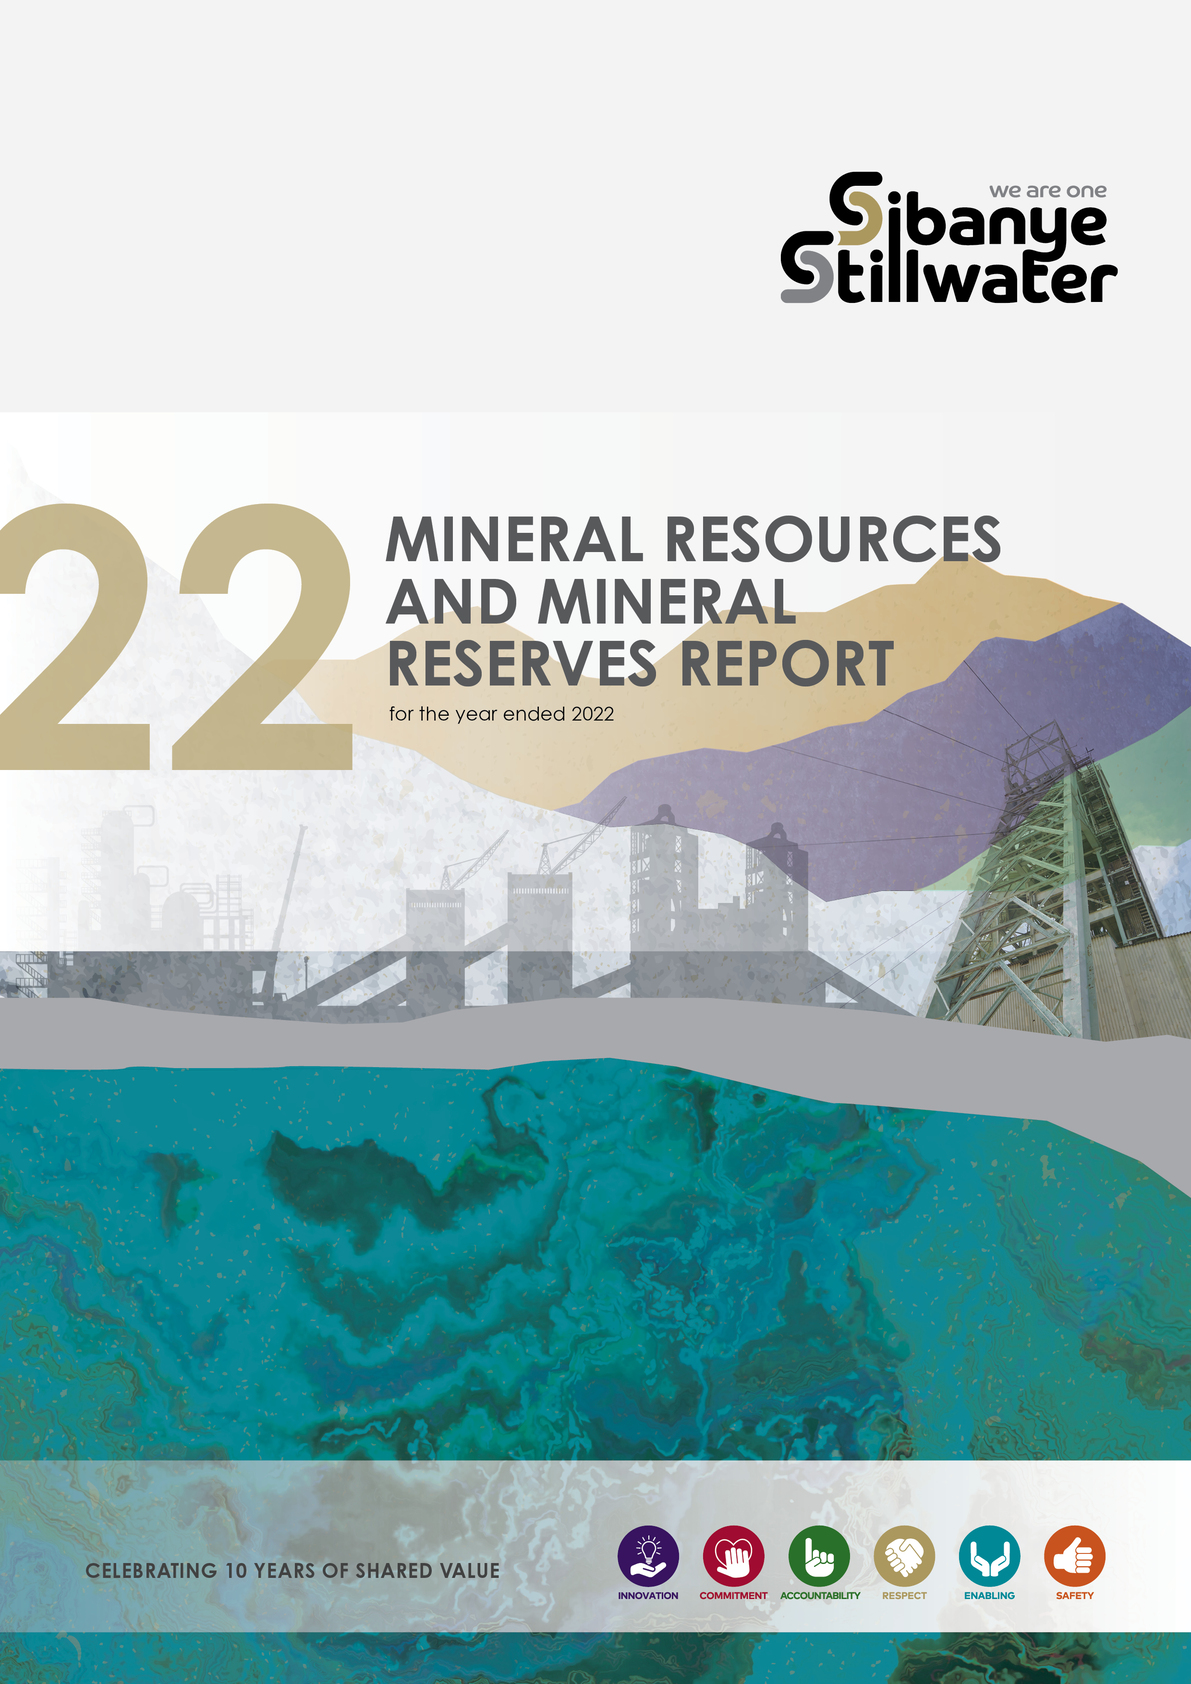 SIBANYE-STILLWATER_Mineral Resources and Mineral Reserves Report 2022.jpg